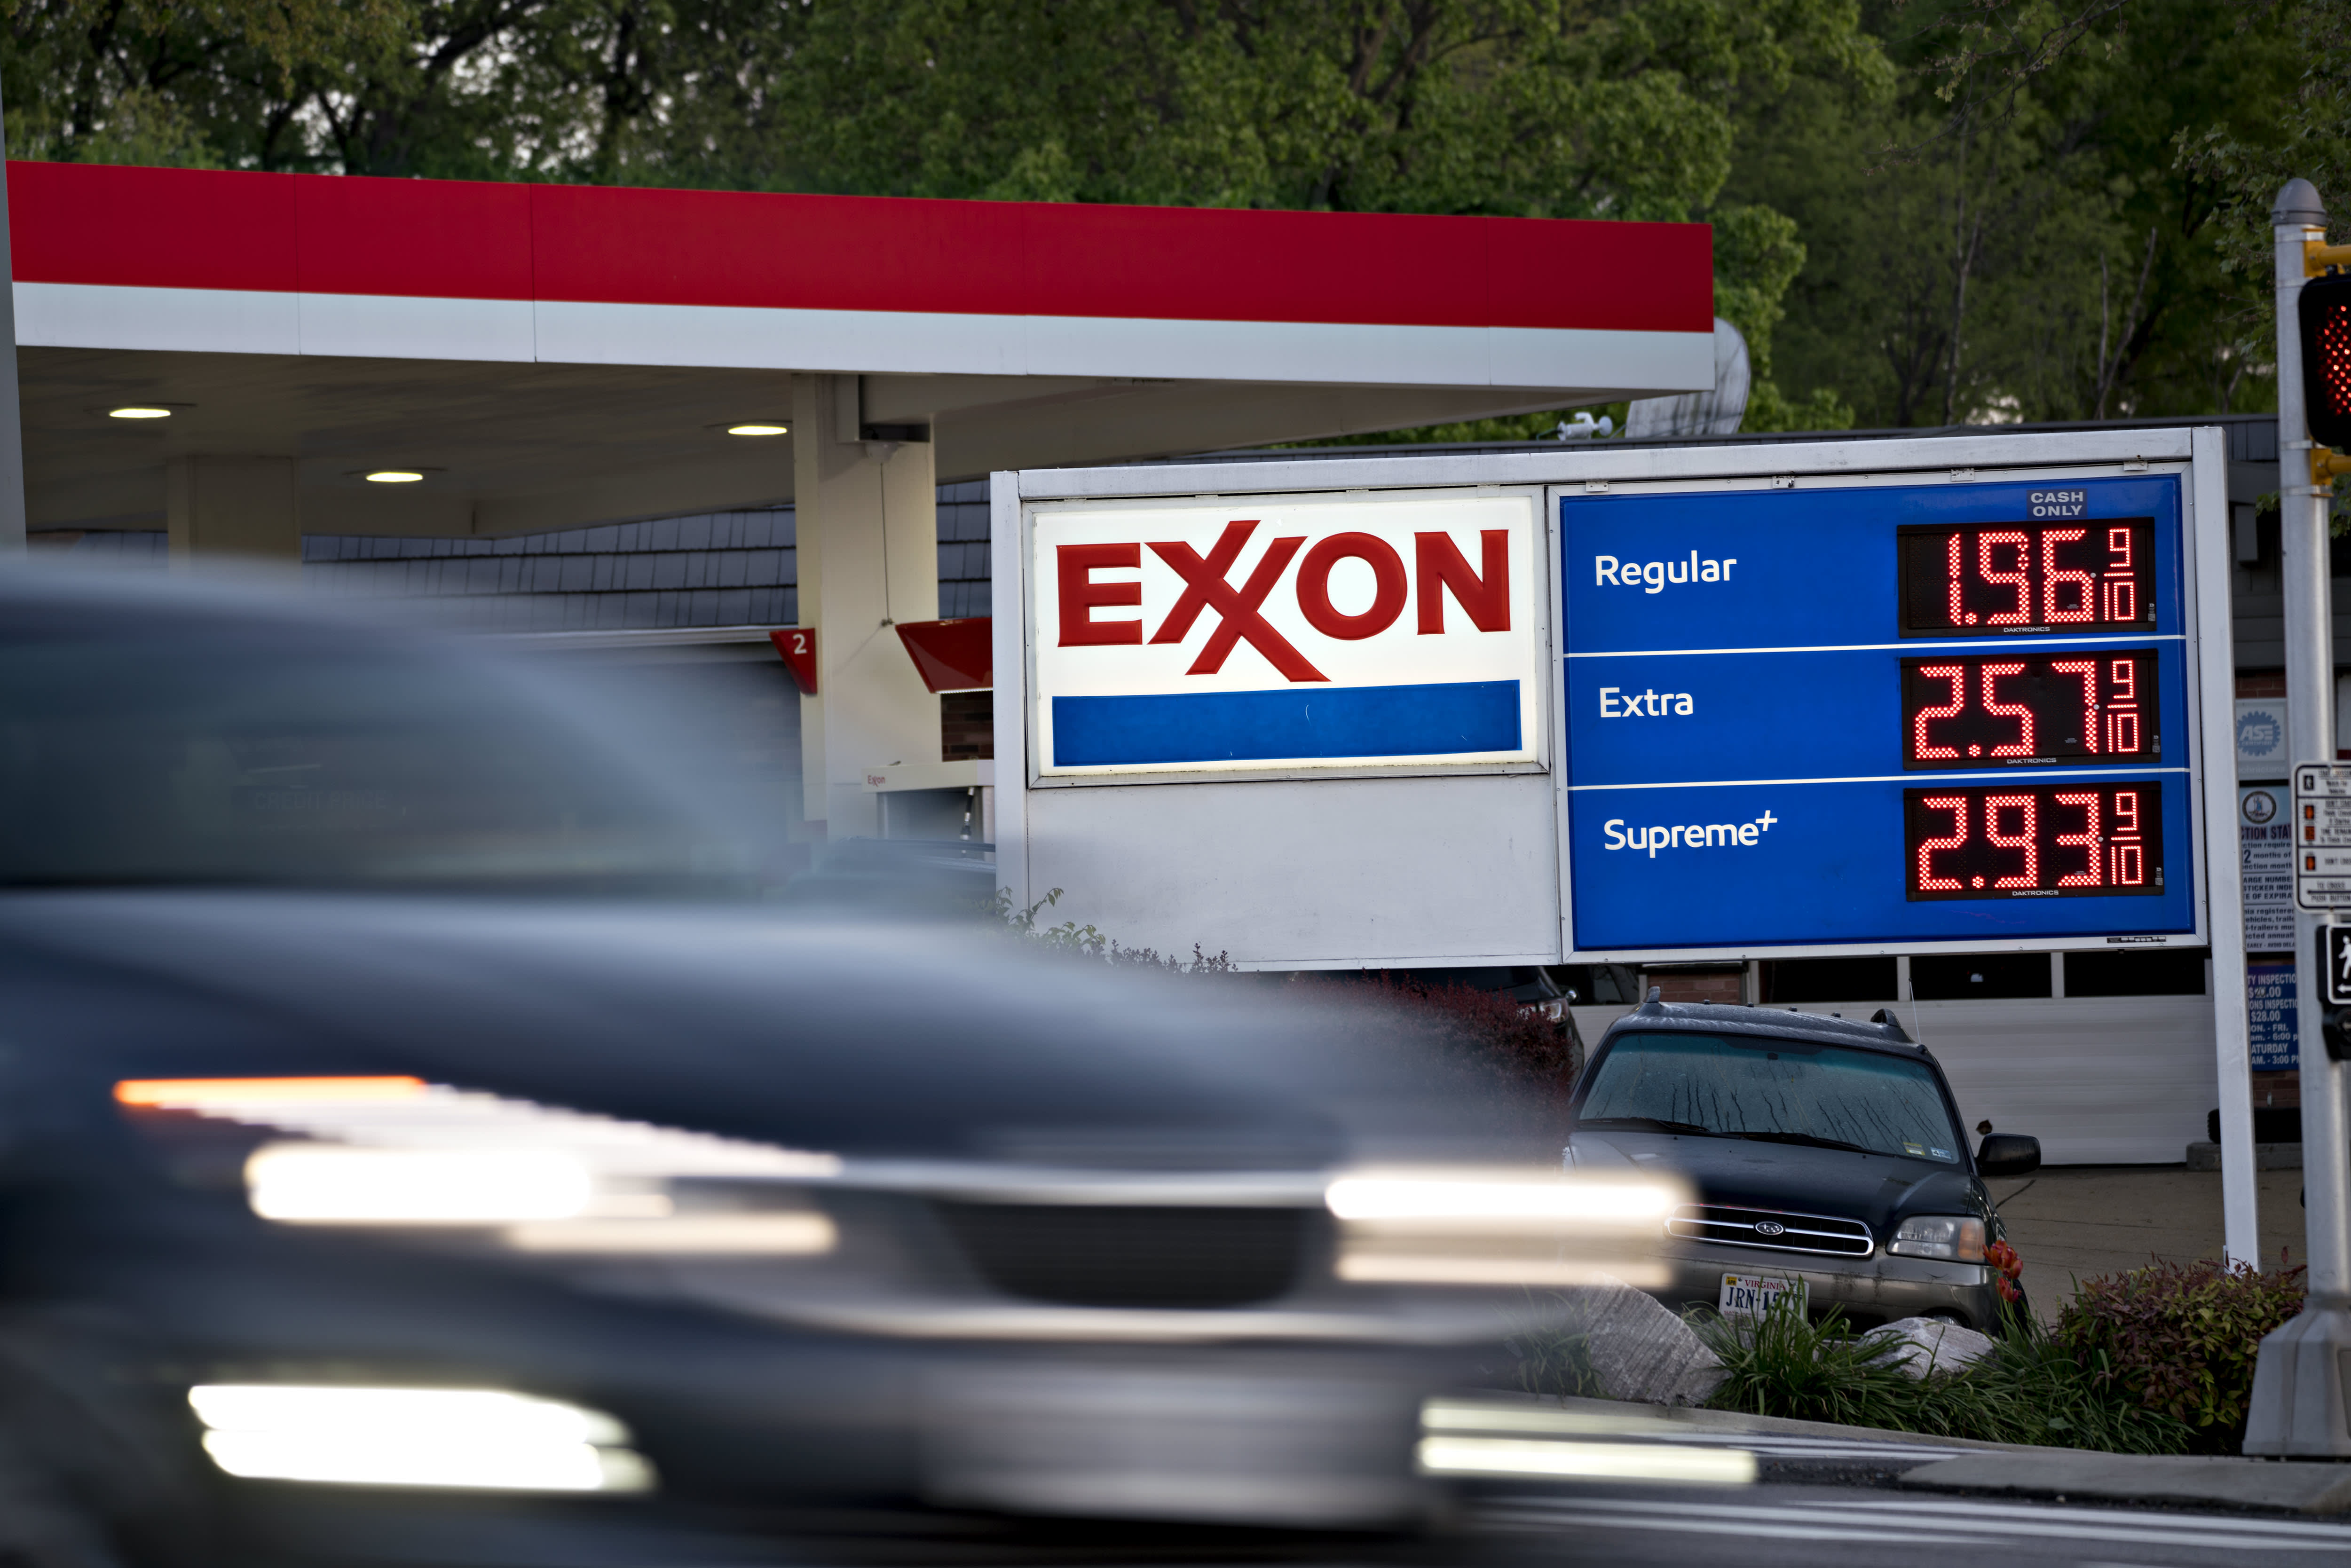 Chevron and Exxon discussed merger last year: reports